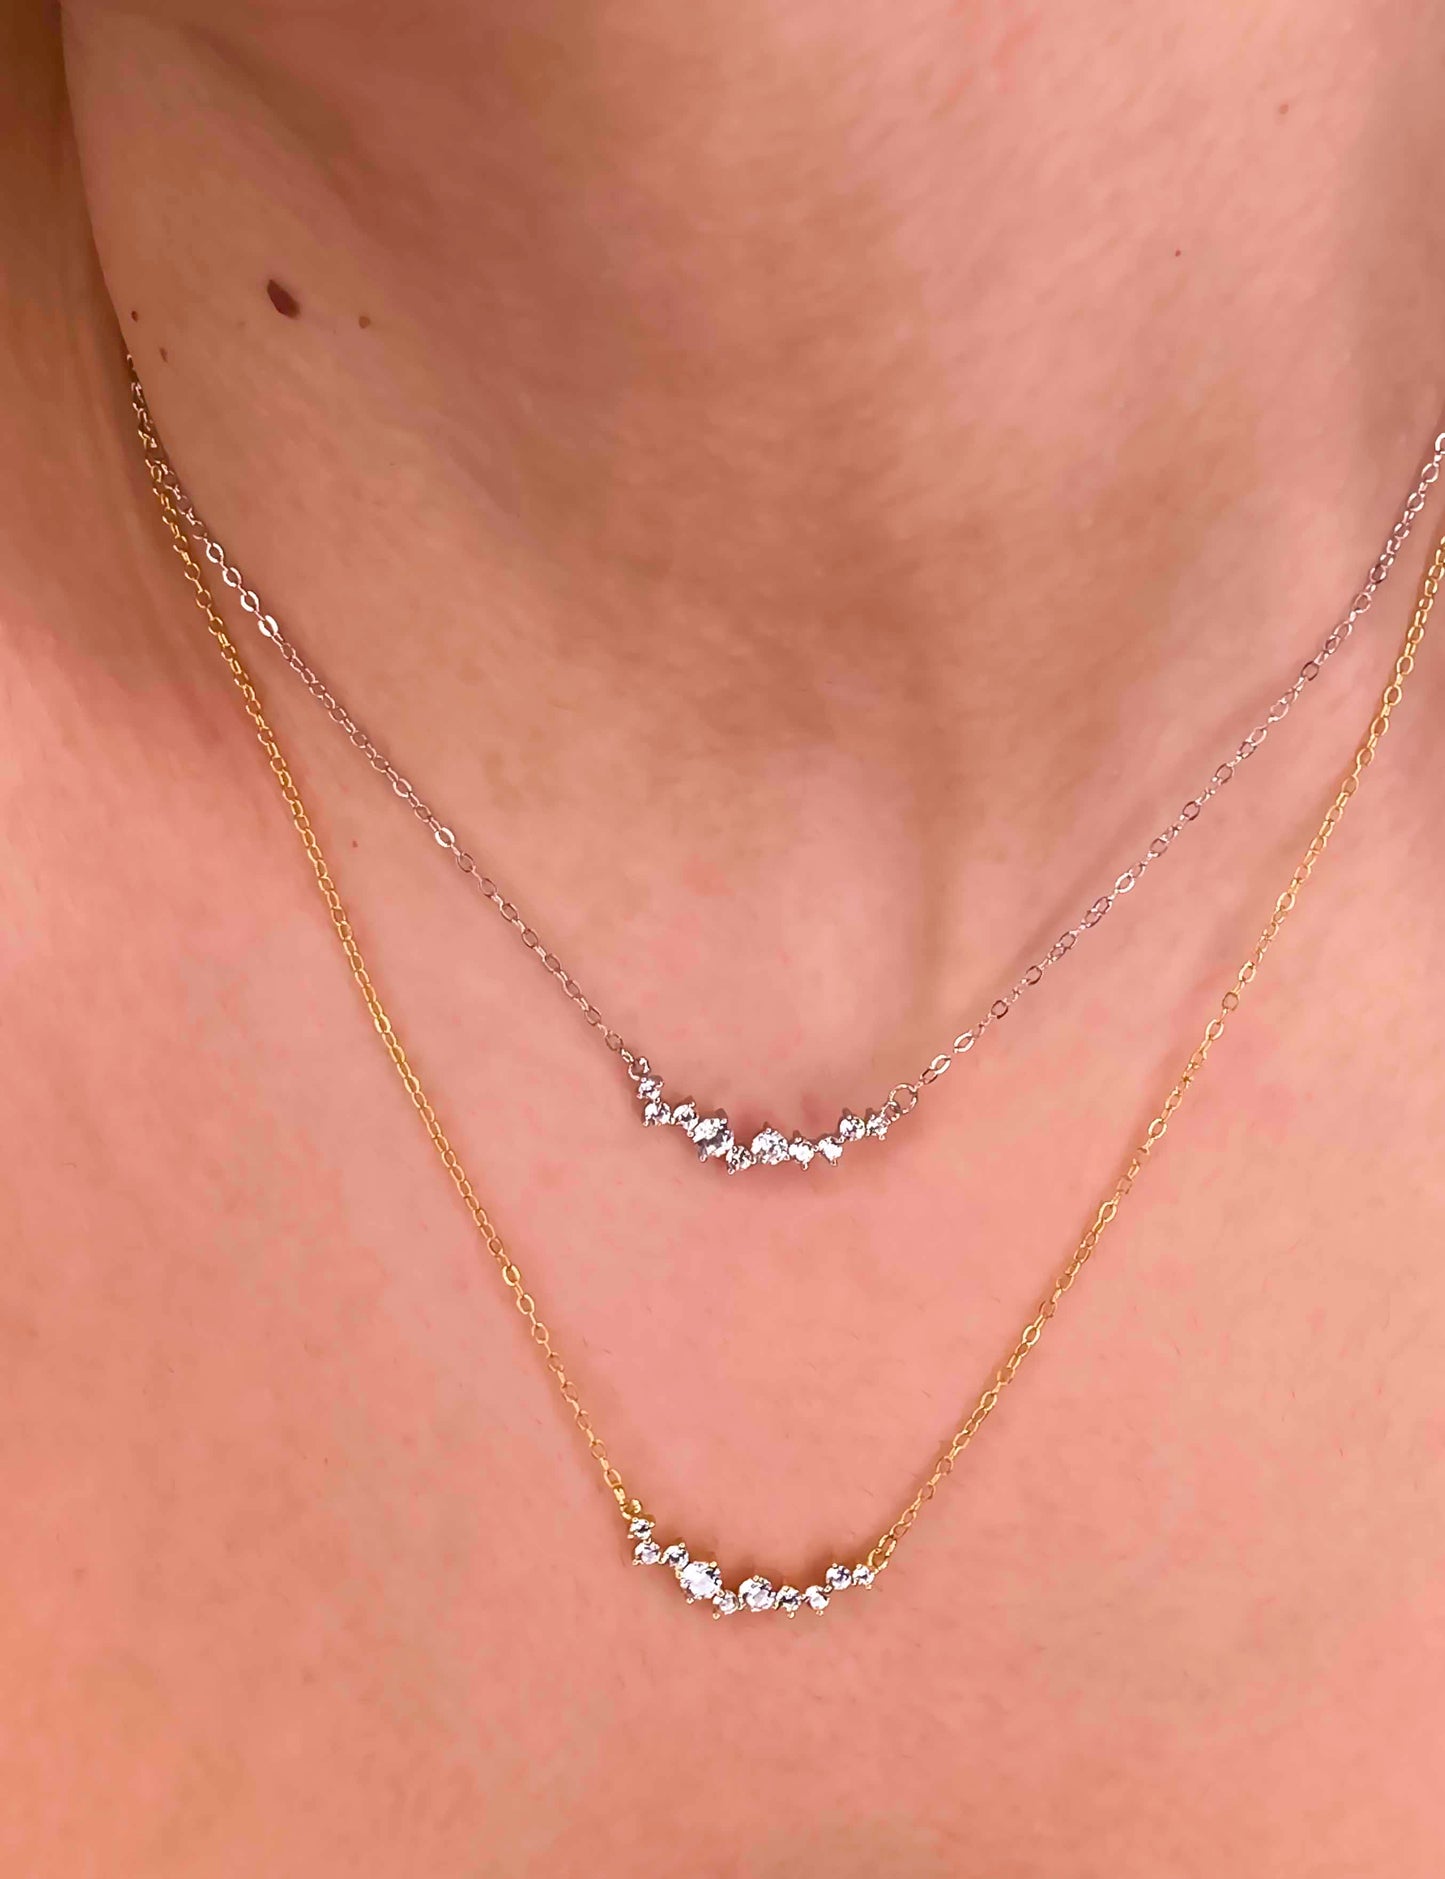 Handcrafted 925 sterling silver and gold plated pave zircon pendant necklaces.